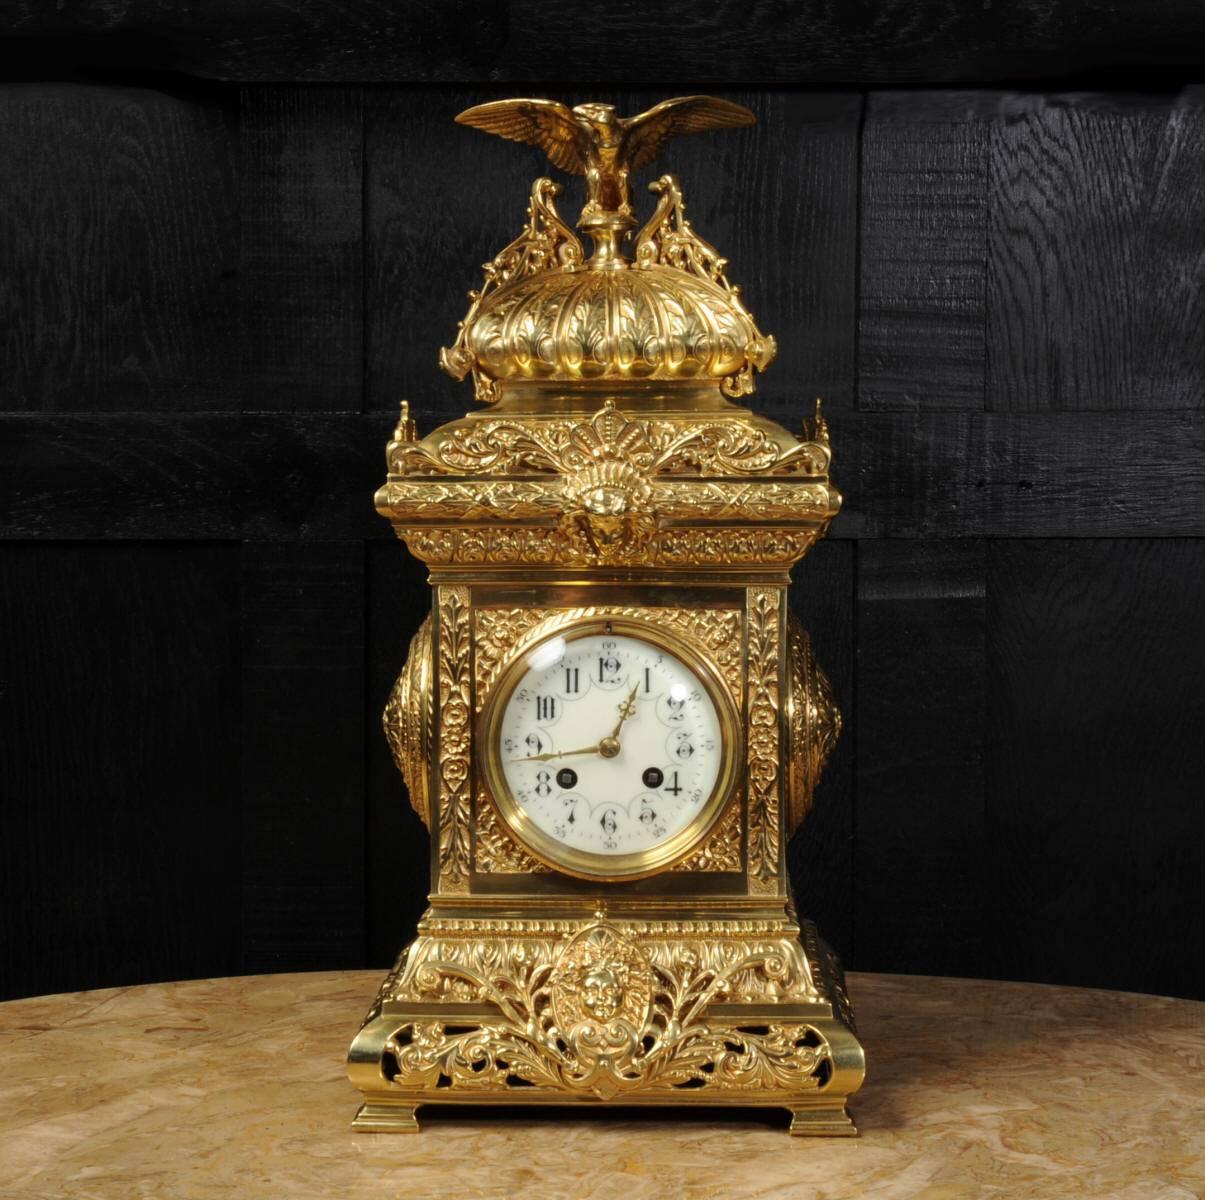 A stunning large sized original antique French table clock. It is in the classical style and features a beautifully modelled eagle seated on the cushion shaped top. The case is decorated with acanthus leaves and acanthus roundels to the sides with